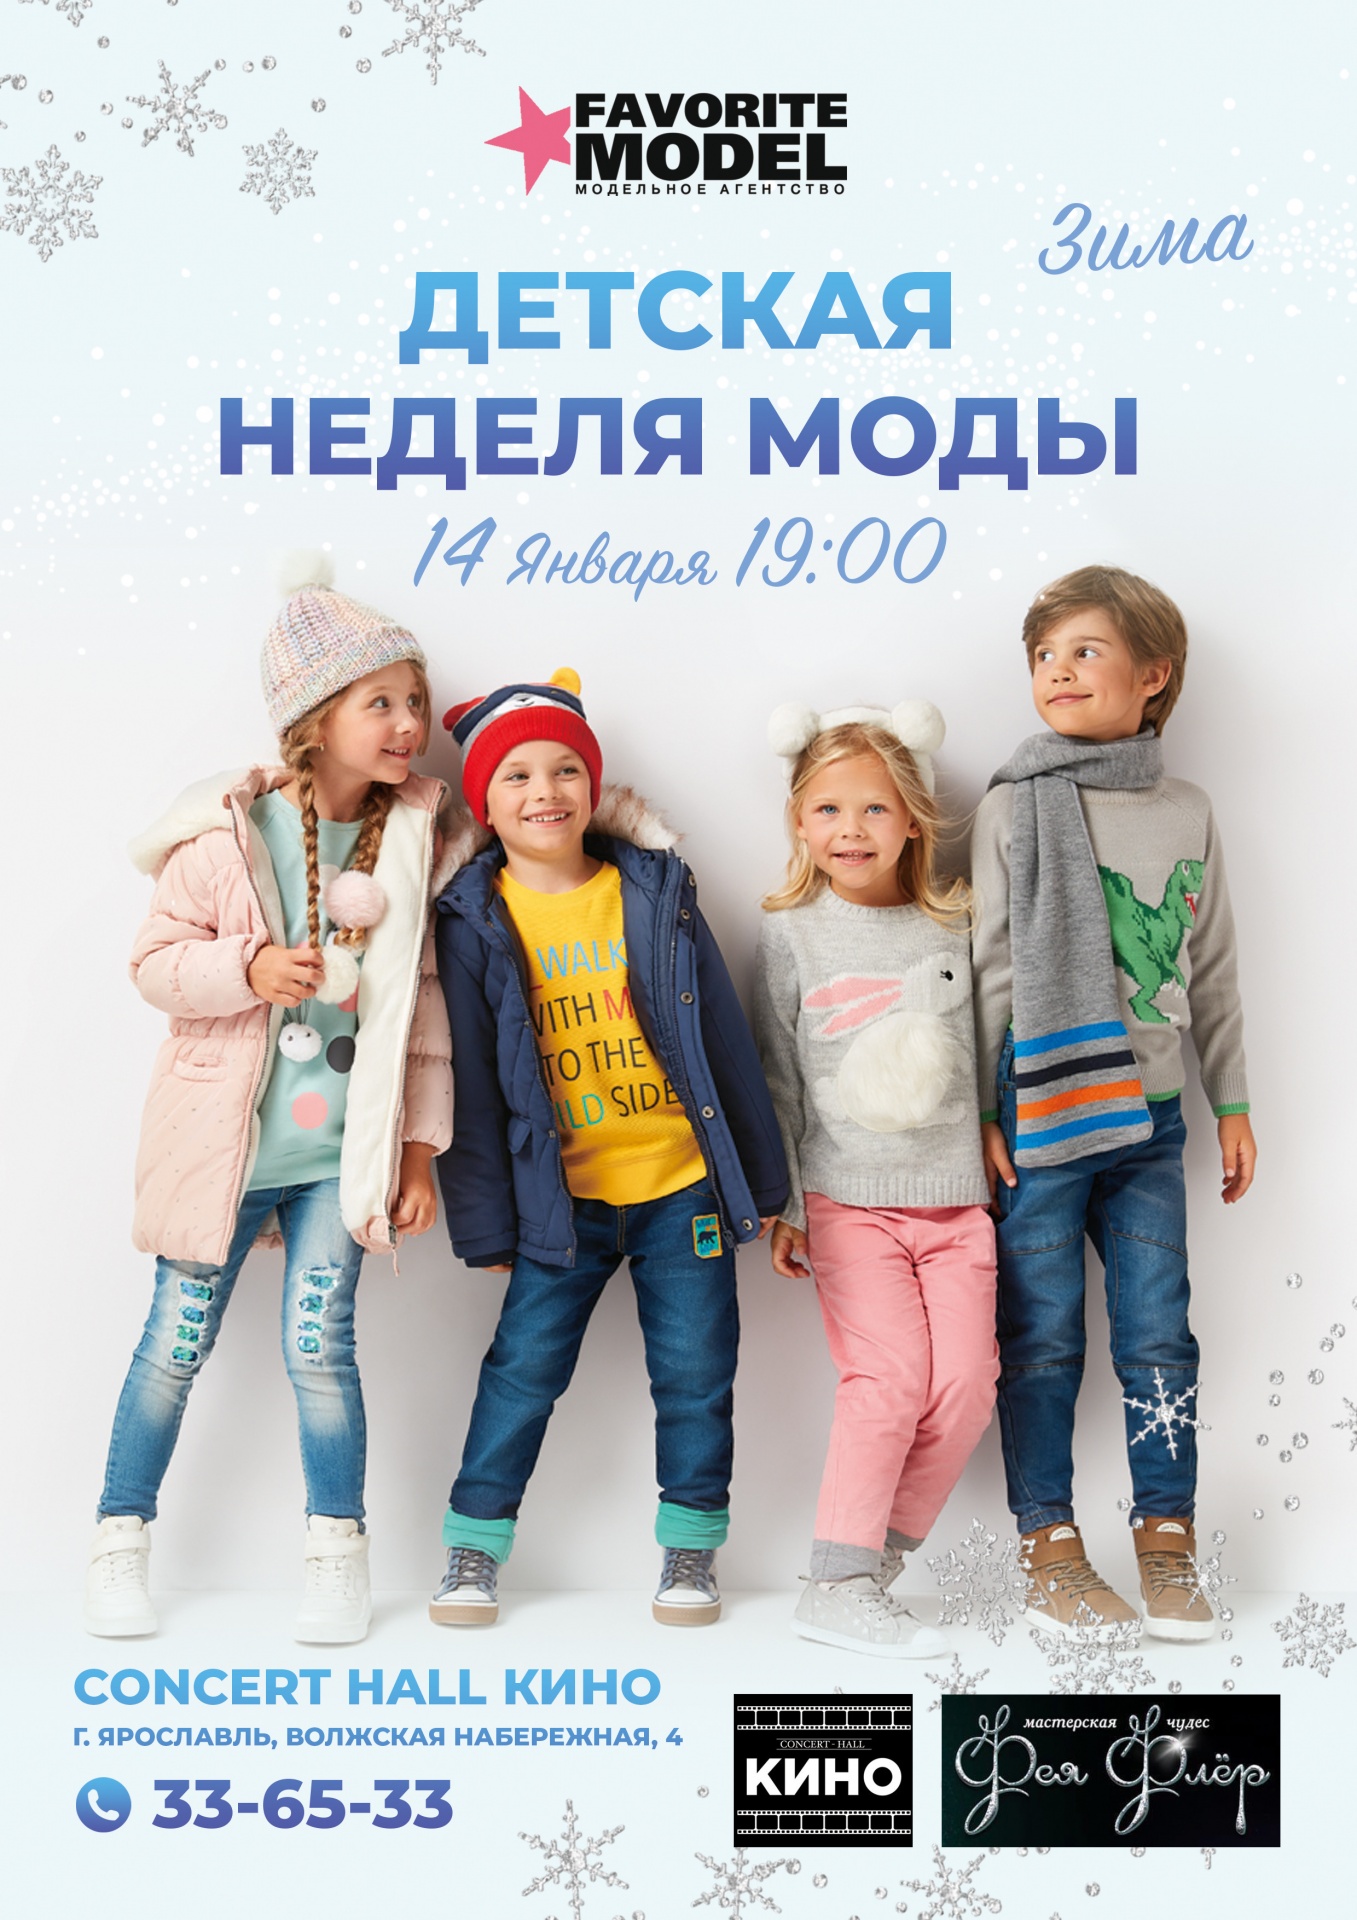 The fashionable winter event will take place on January 14! Children's Fashion Week Winter where the best models of the city will perform and the best children's clothing collections will be presented!